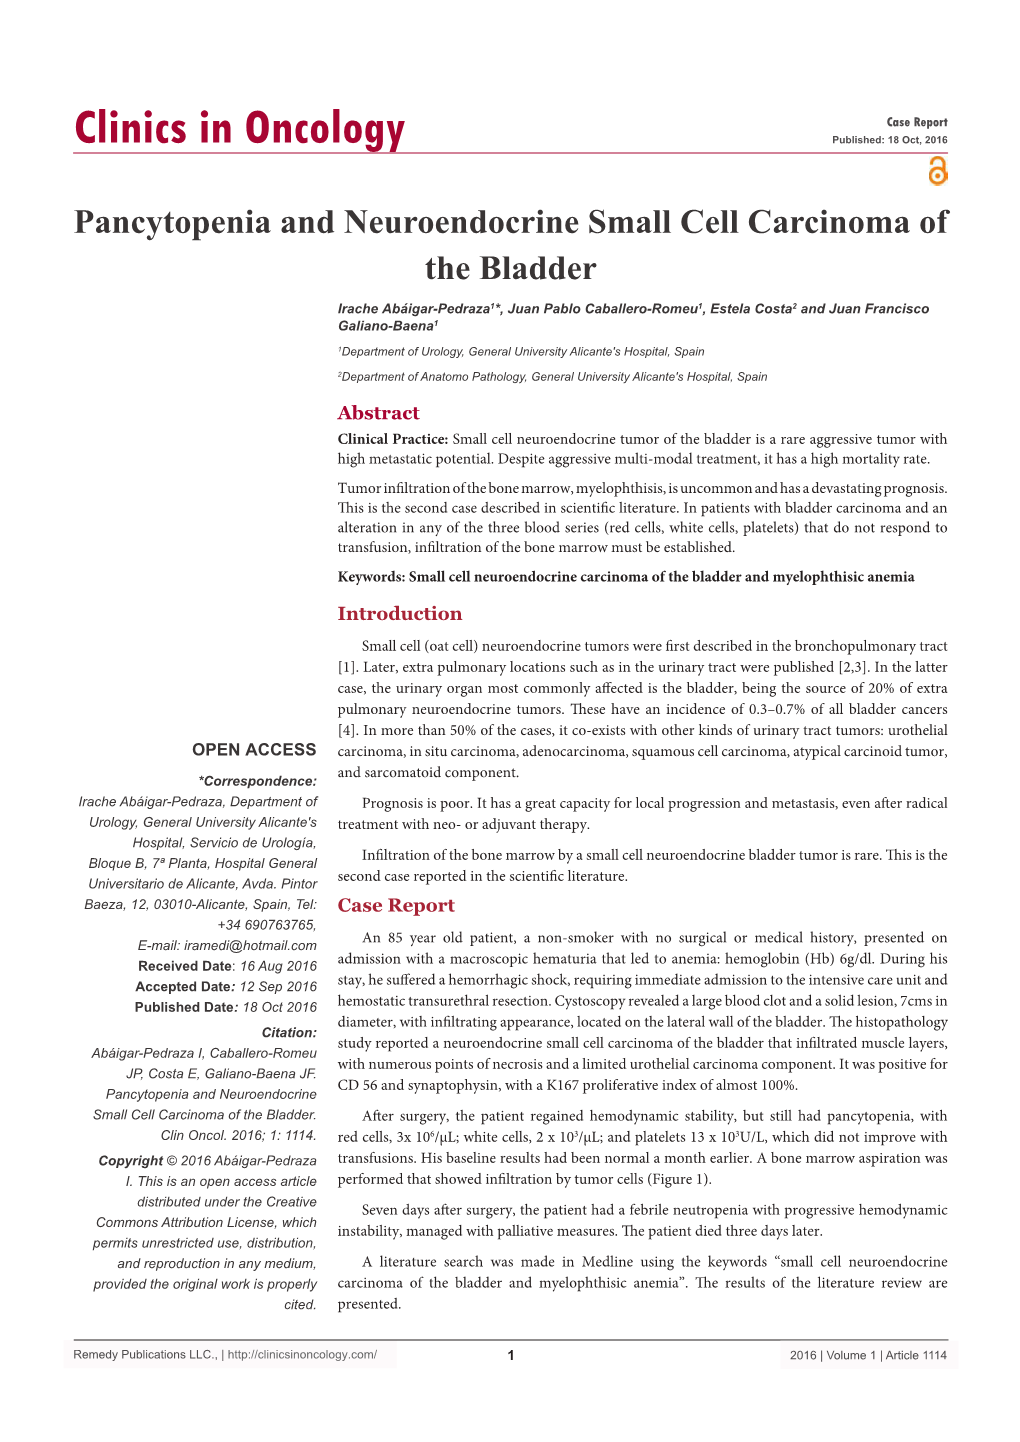 Pancytopenia and Neuroendocrine Small Cell Carcinoma of the Bladder